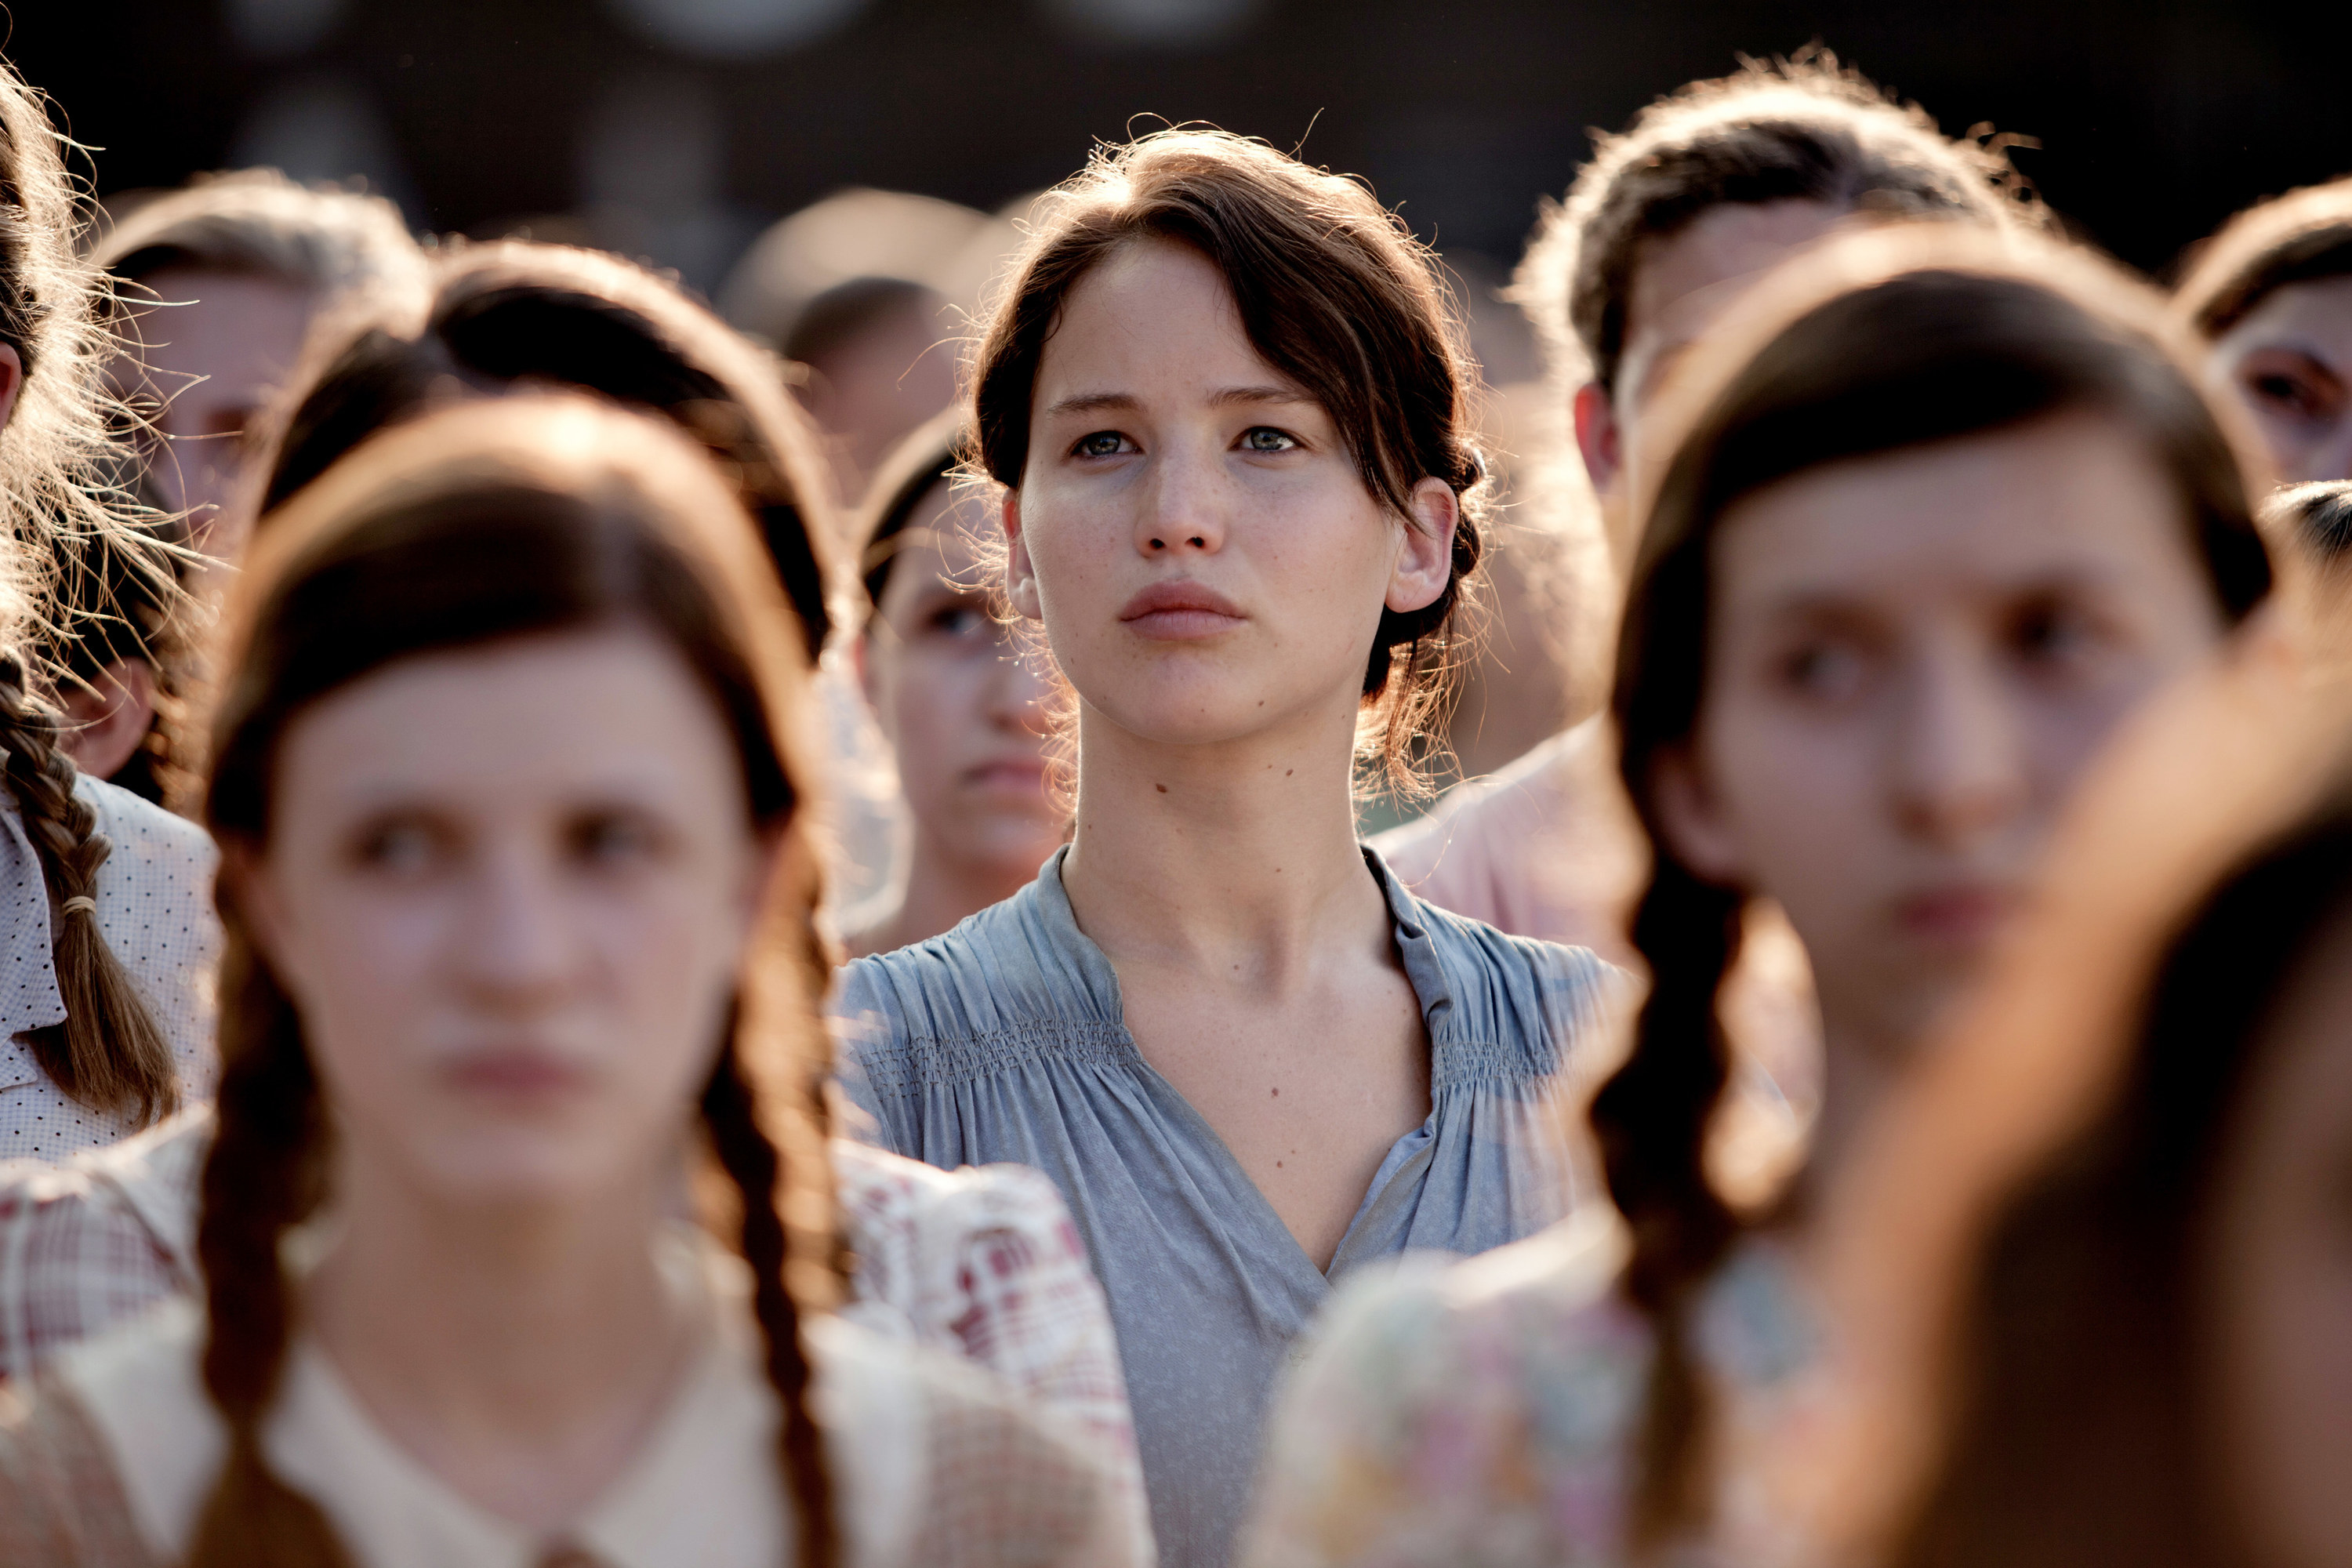 Jennifer Lawrence stands in a crowd of people